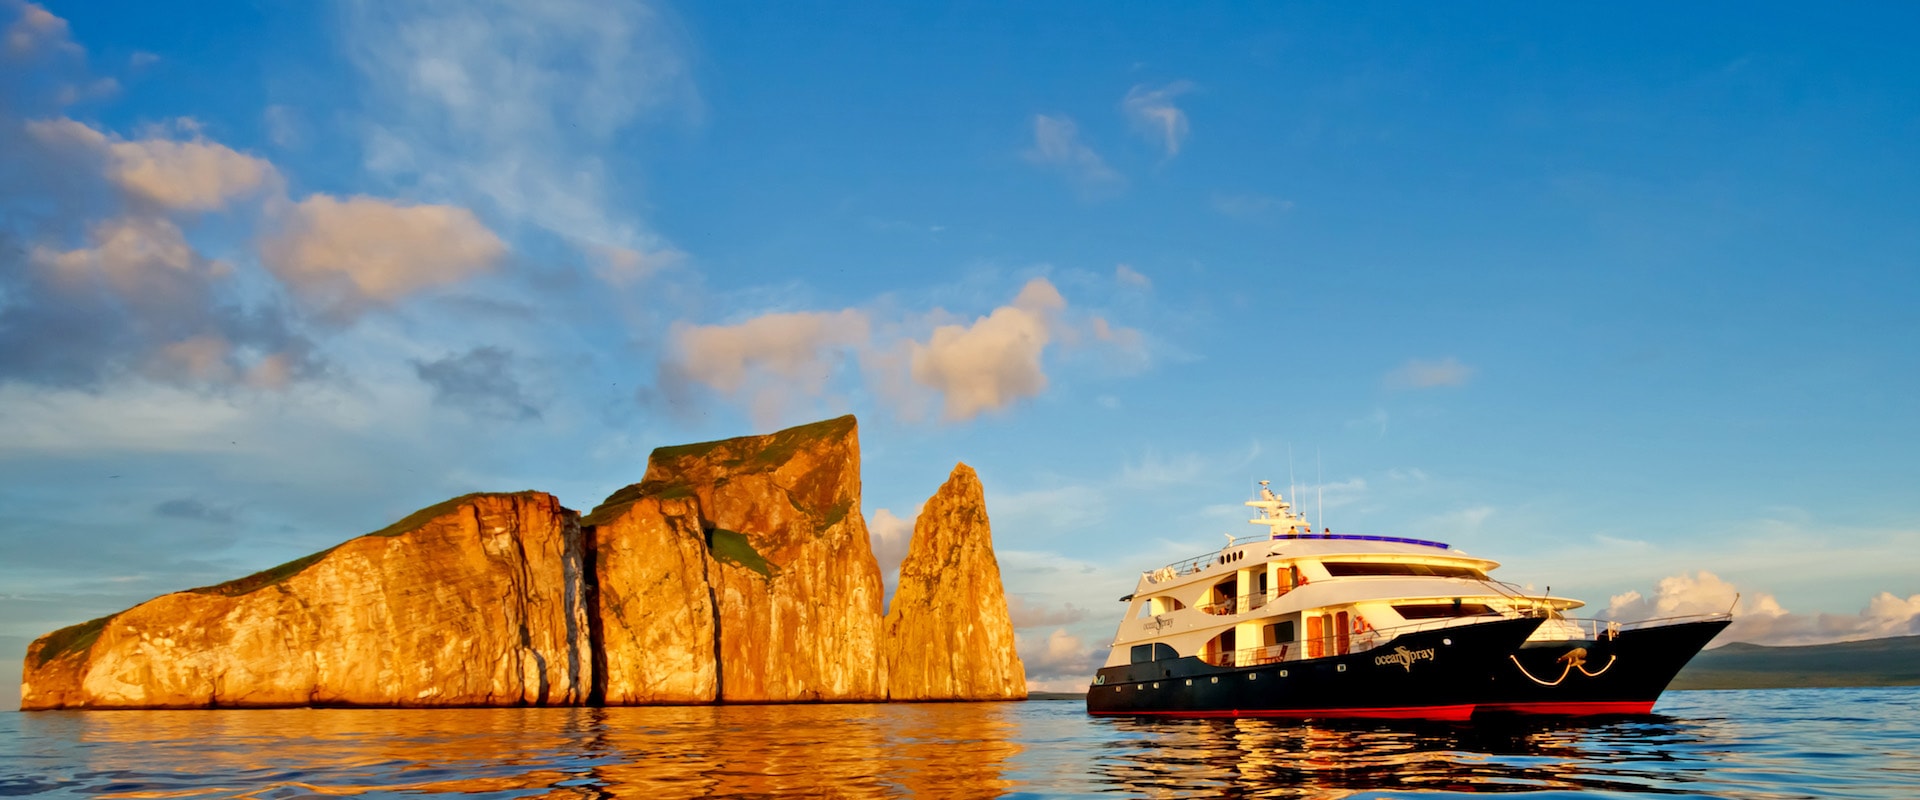 54 Cruises in Galapagos - LiveAboard.com